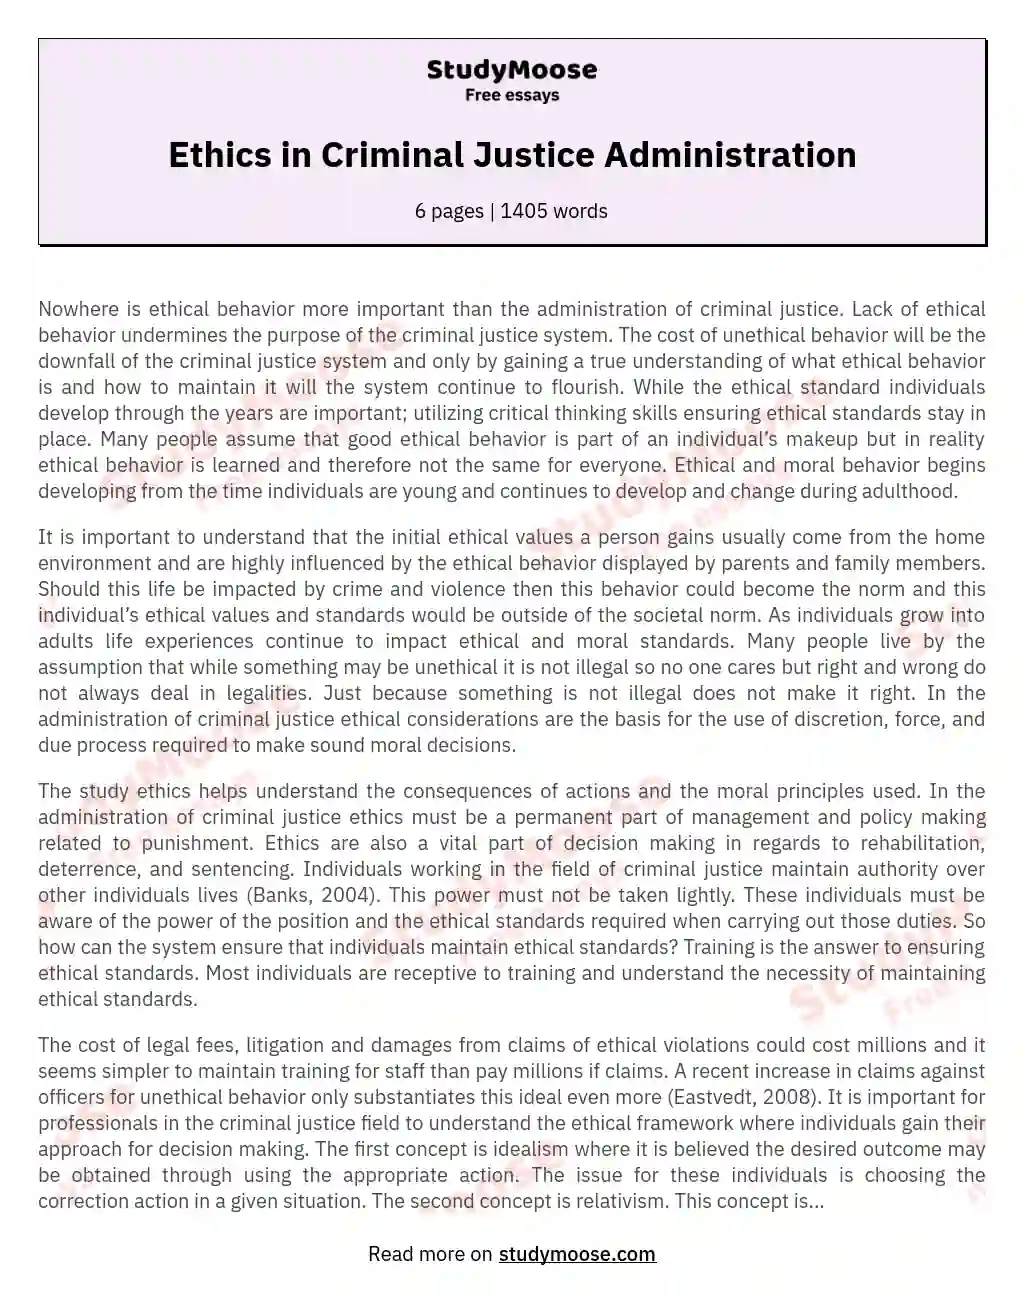 Ethics in Criminal Justice Administration